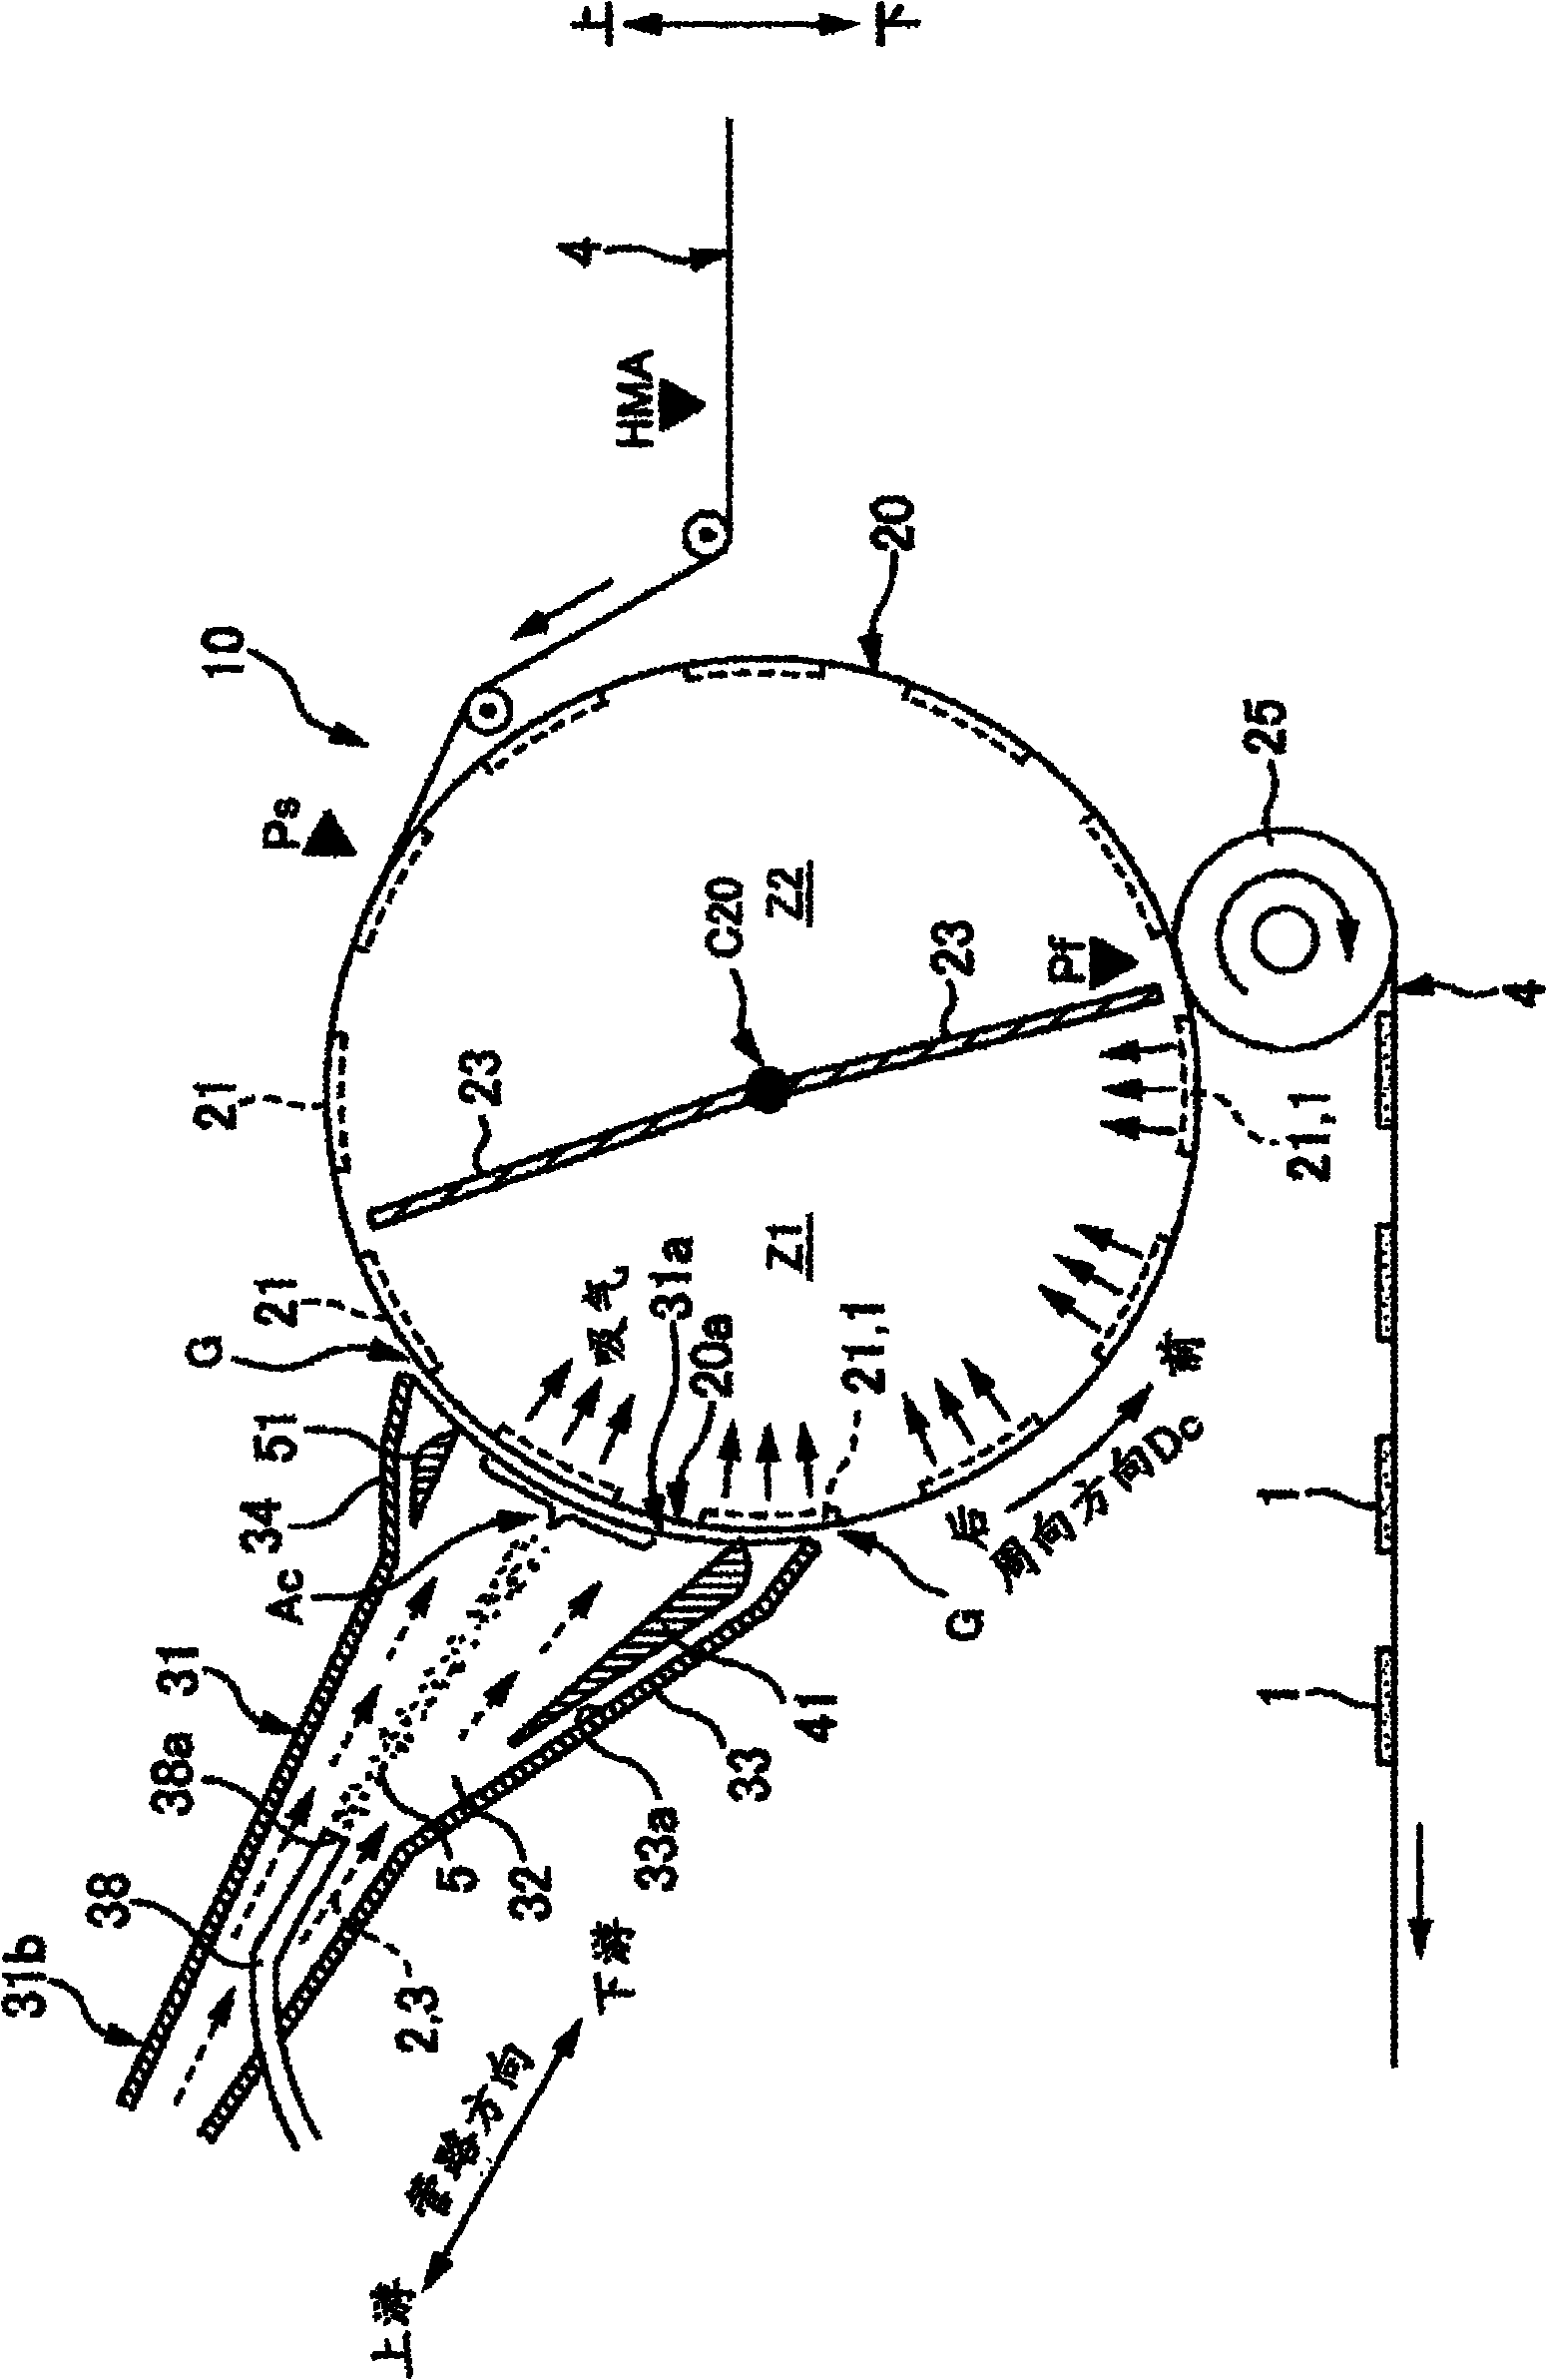 Apparatus and process for producing absorbent